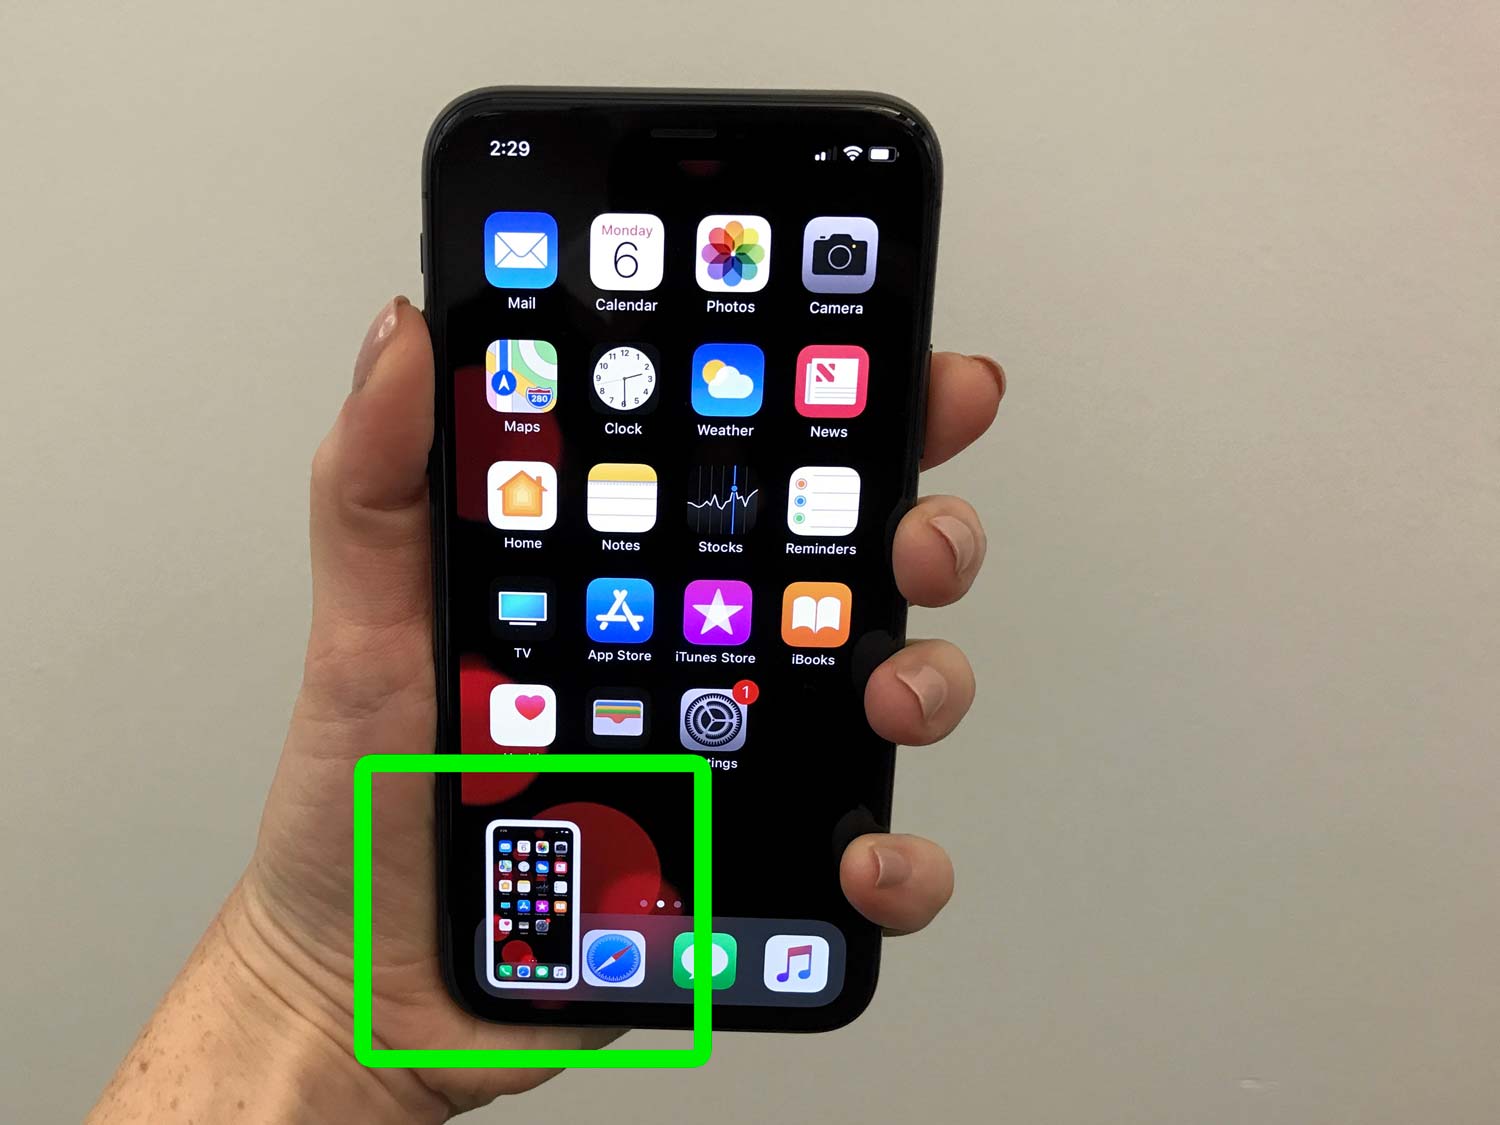 As Apple continues to remove physical buttons from its lineup of devices, taking a screenshot becomes a much tougher task as the button combinations continue to change.